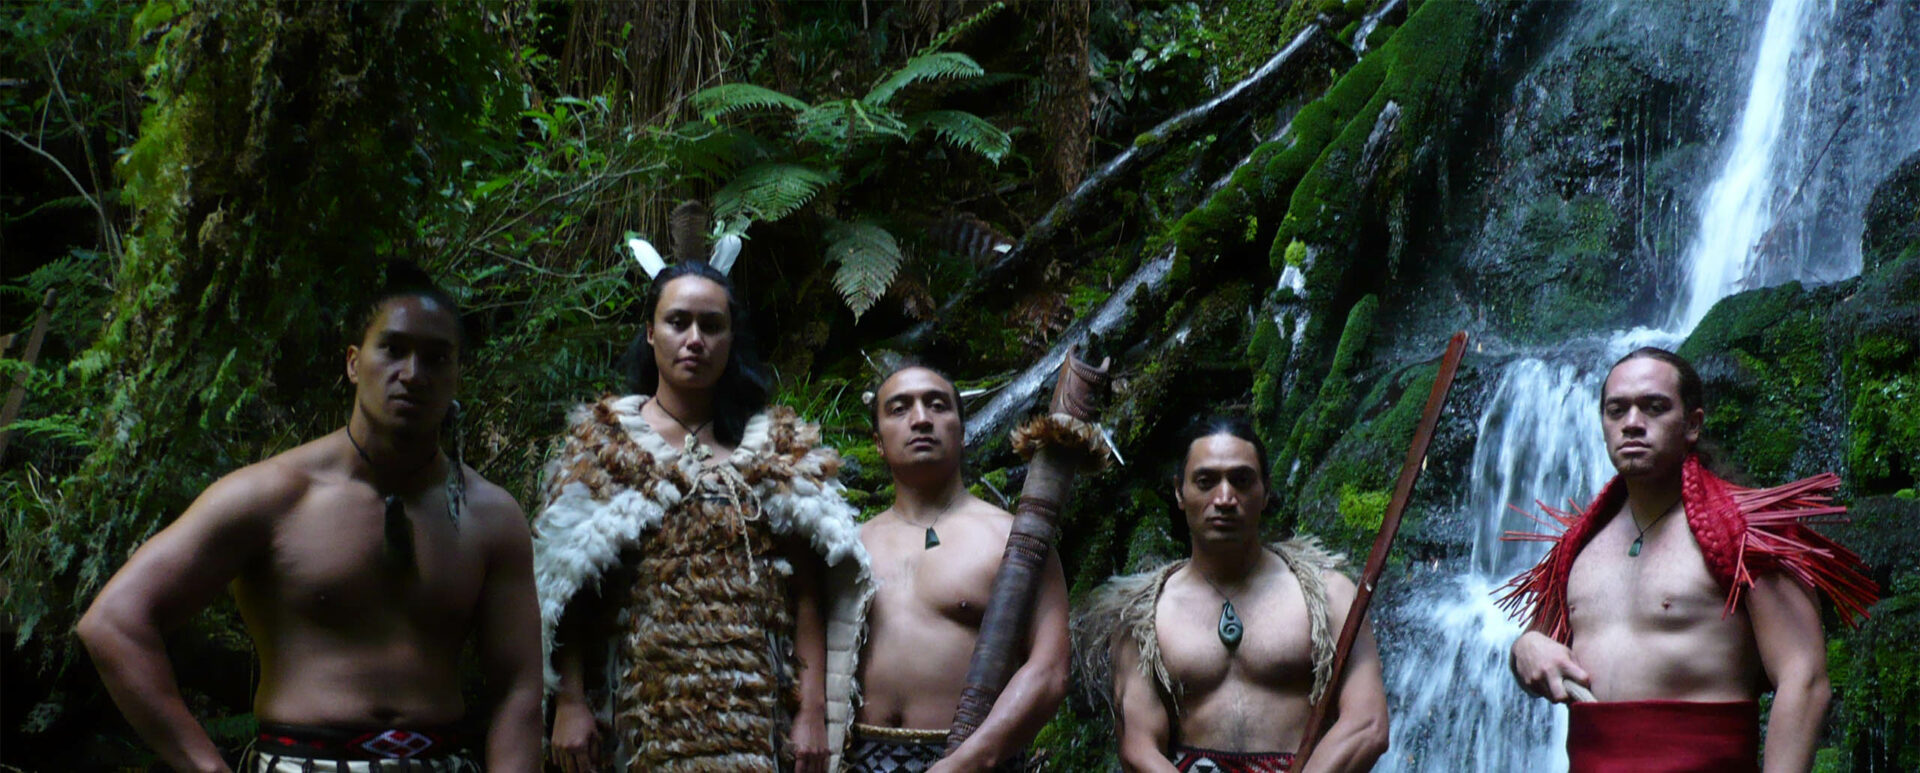 Spending time with the Māori on New Zealand’s North Island